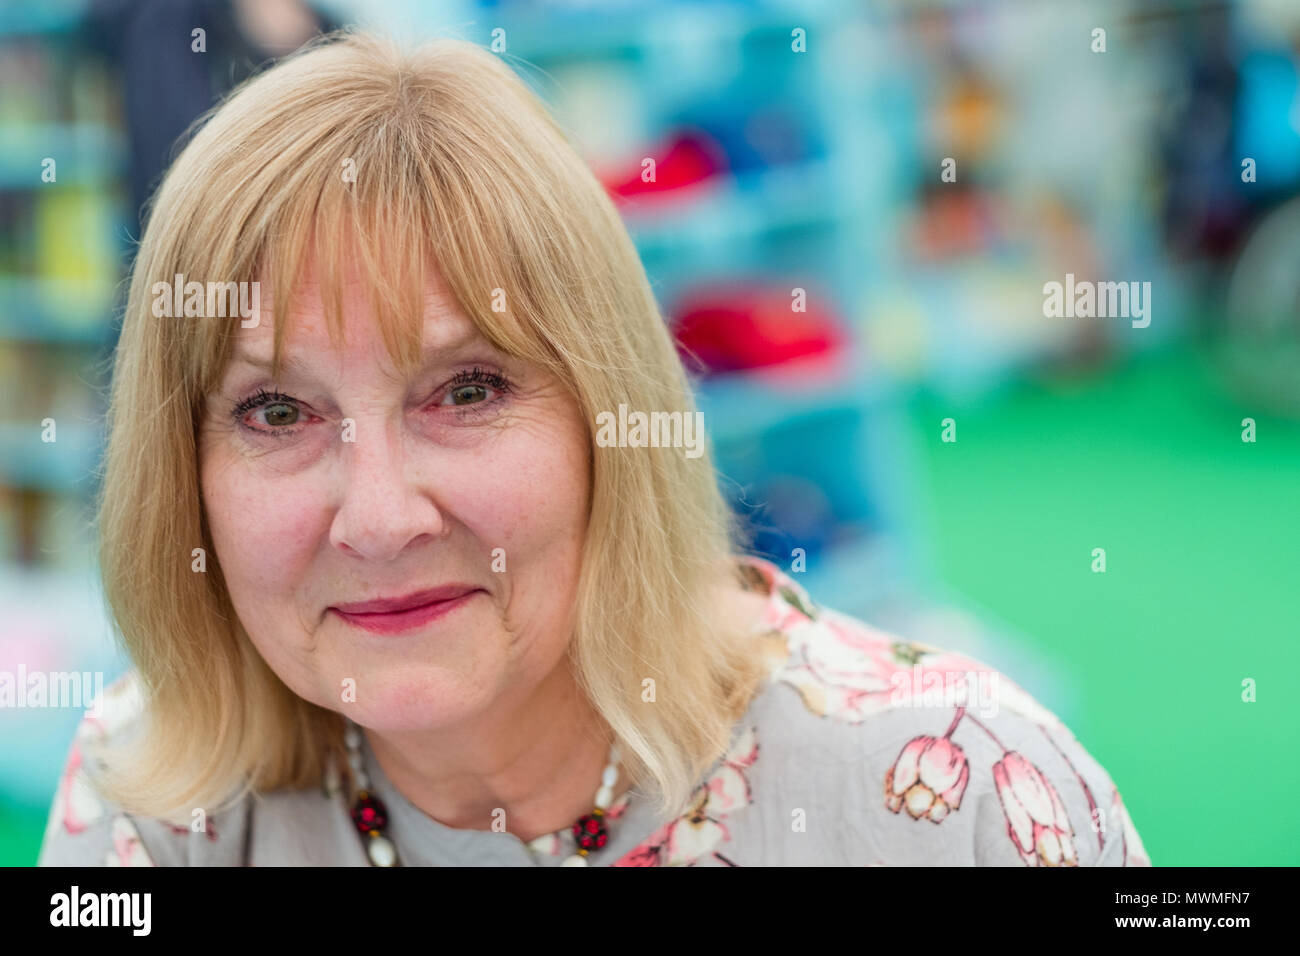 Helen F. Rappaport, British author and former actress. She specialises in the Victorian era and revolutionary Russia  At the Hay Festival  of Literature and the Arts, May 2018 Stock Photo